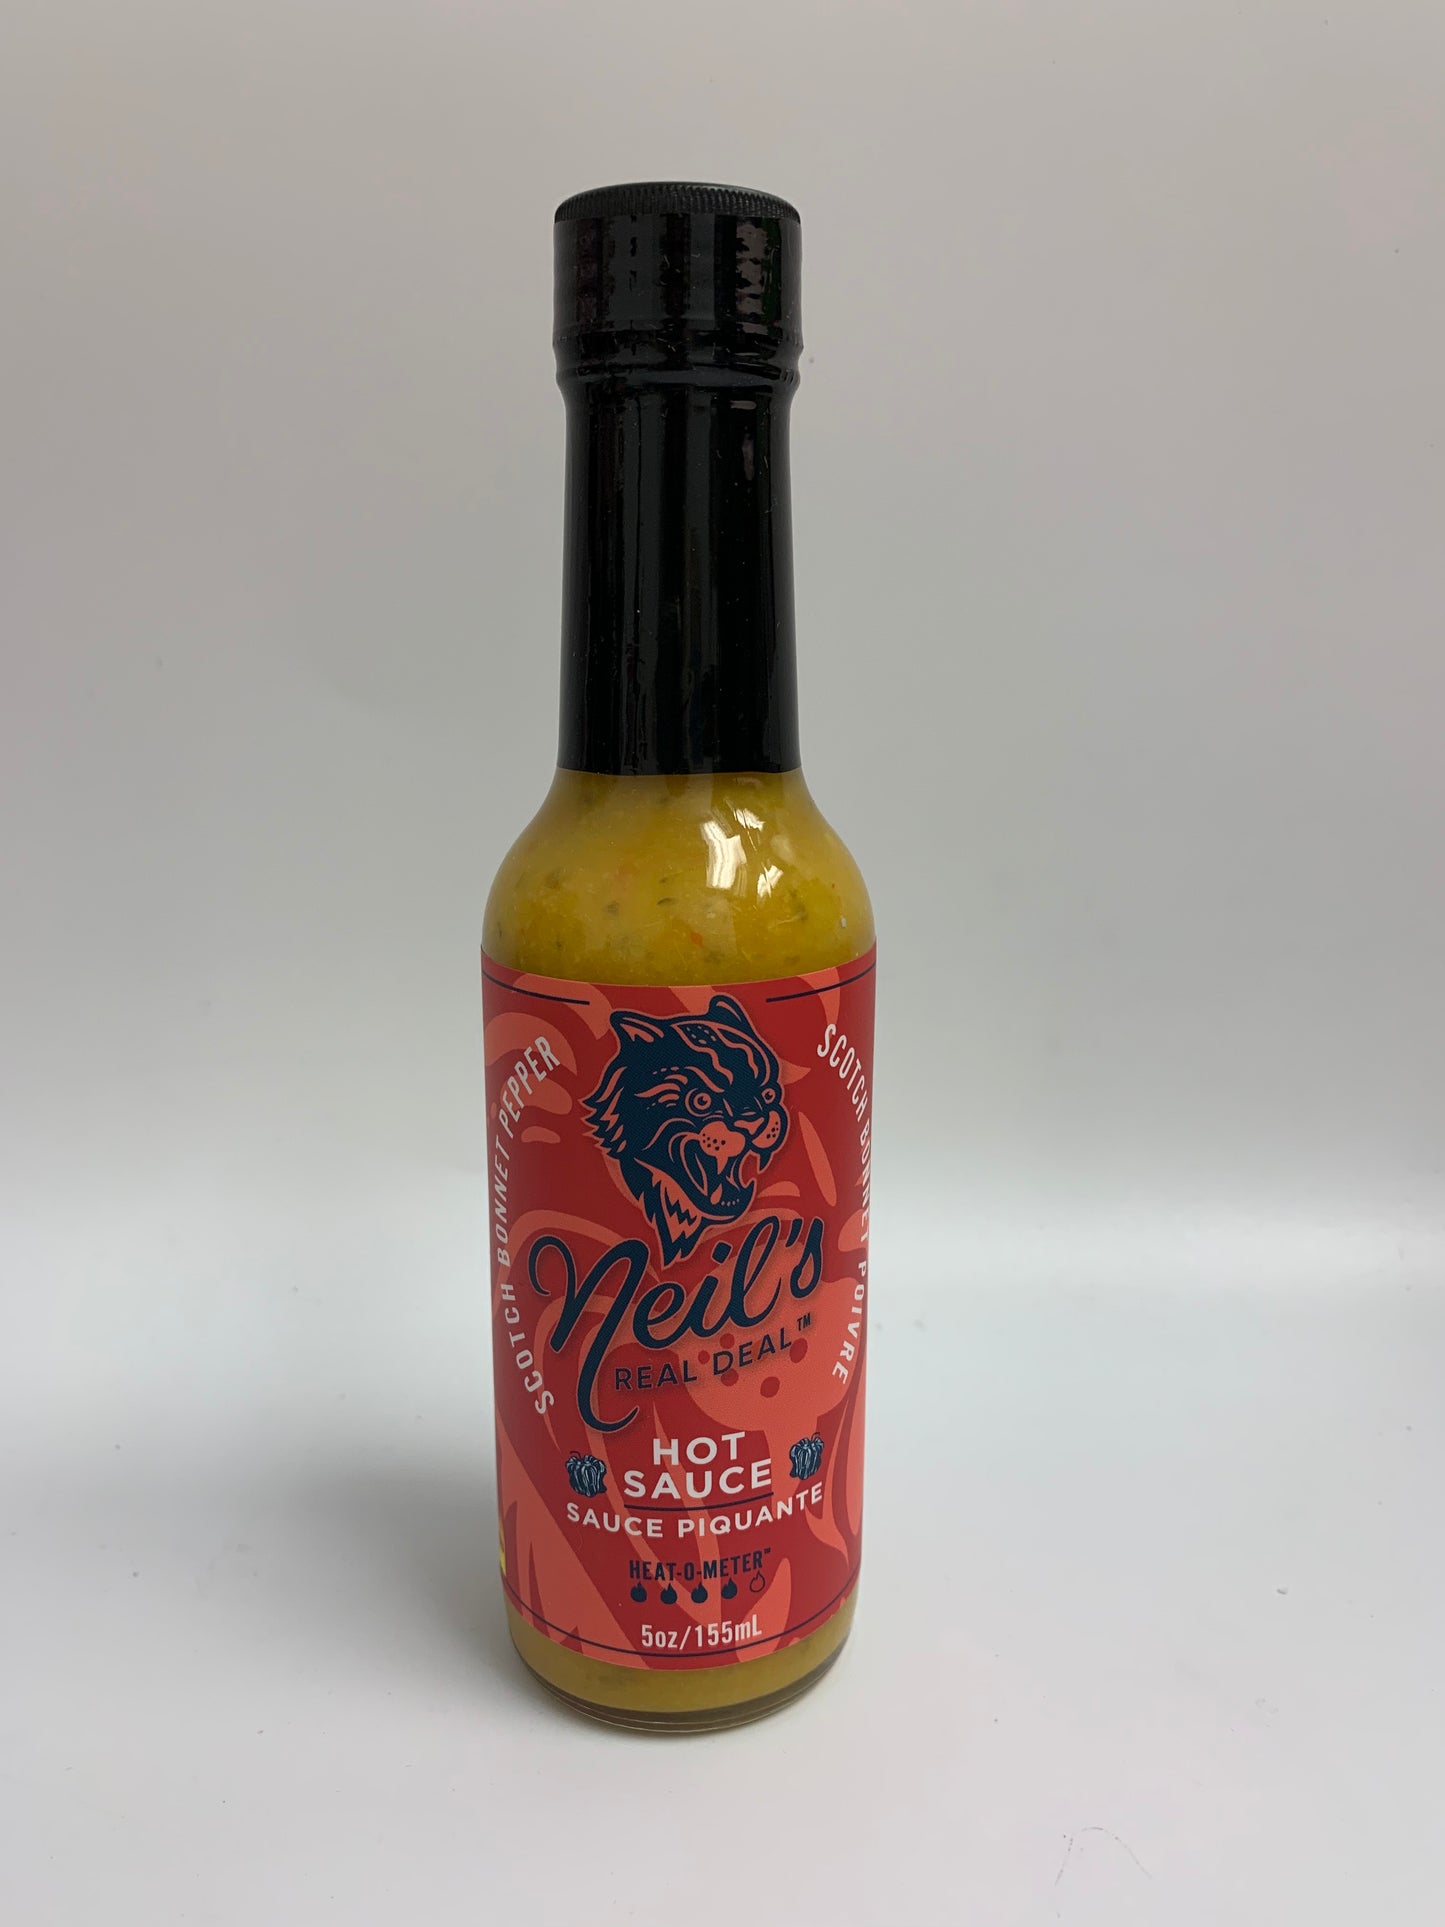 Neil’s Real Deal Hot Sauce